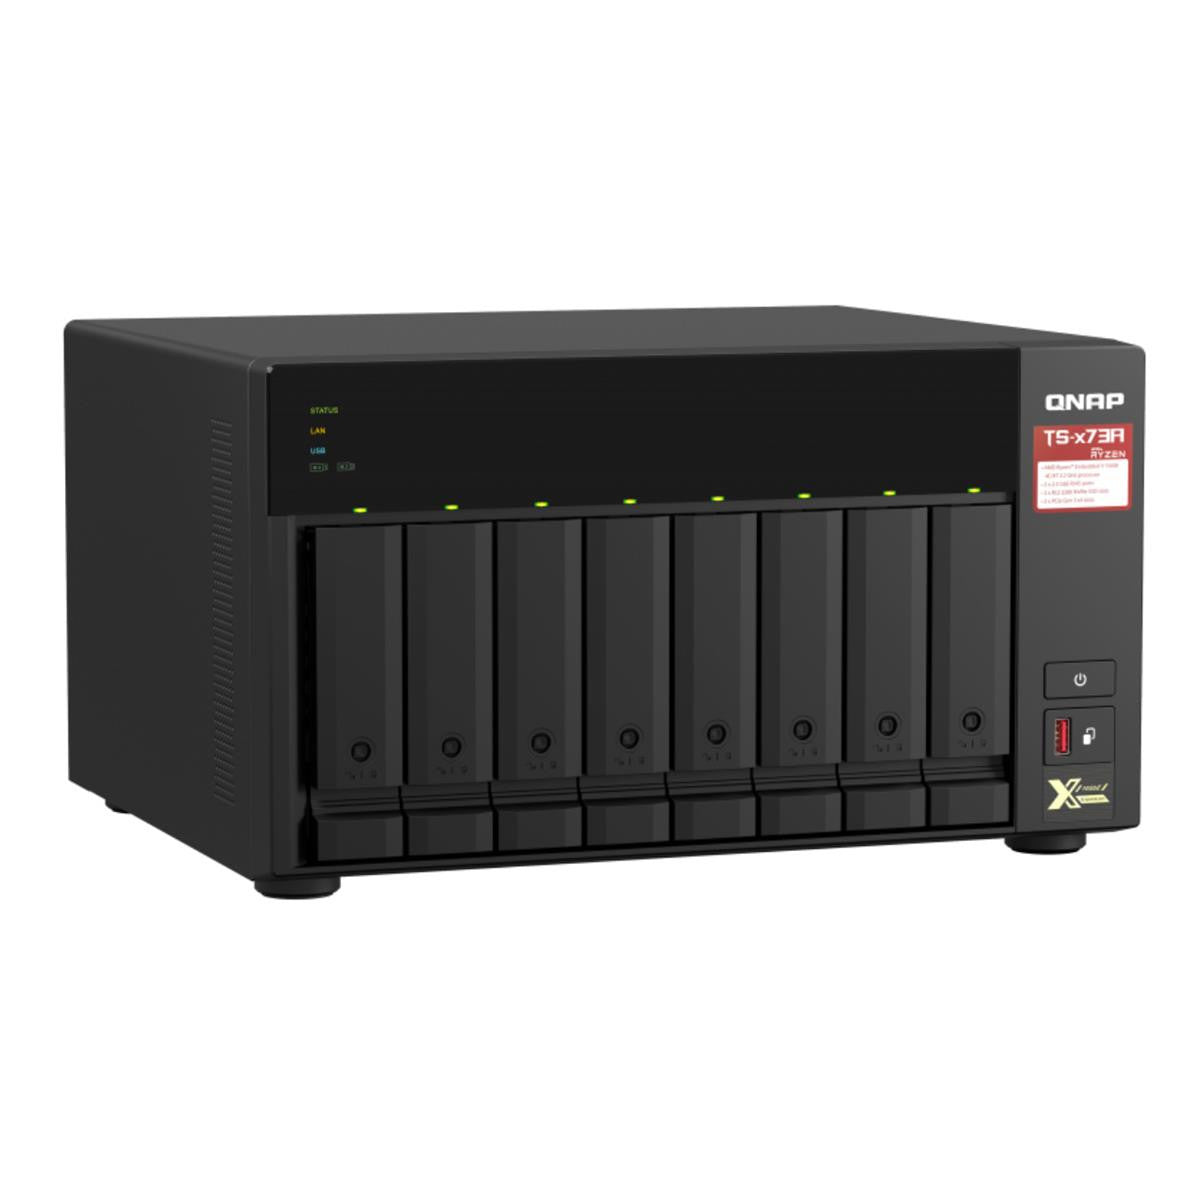 QNAP TS-873A 8-BAY NAS with 16GB DDR4 RAM and 32TB (8x4TB) Western Digital RED PLUS Drives Fully Assembled and Tested